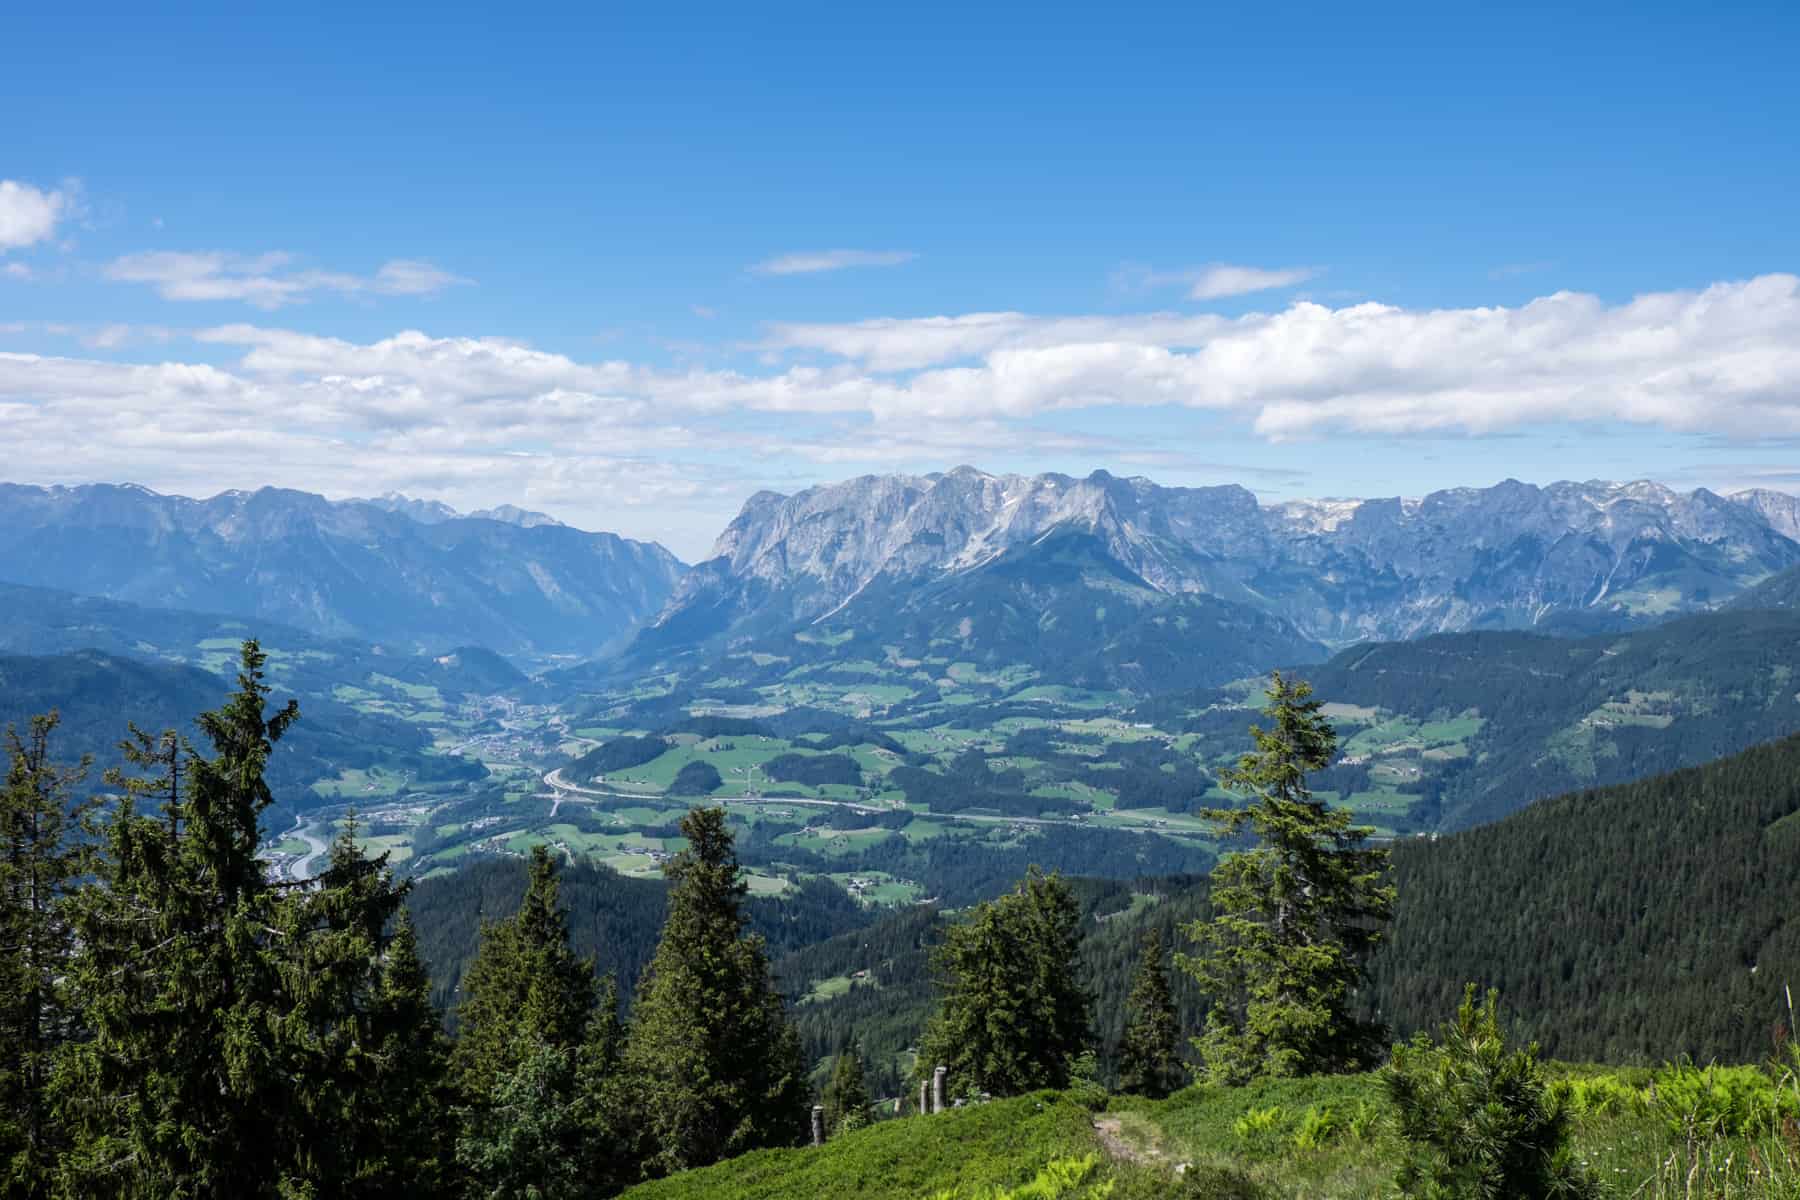 Snow-capped flat-top mountains rise above a wide green valley, seen from a forested viewpoint on Hochgründeck, Austria